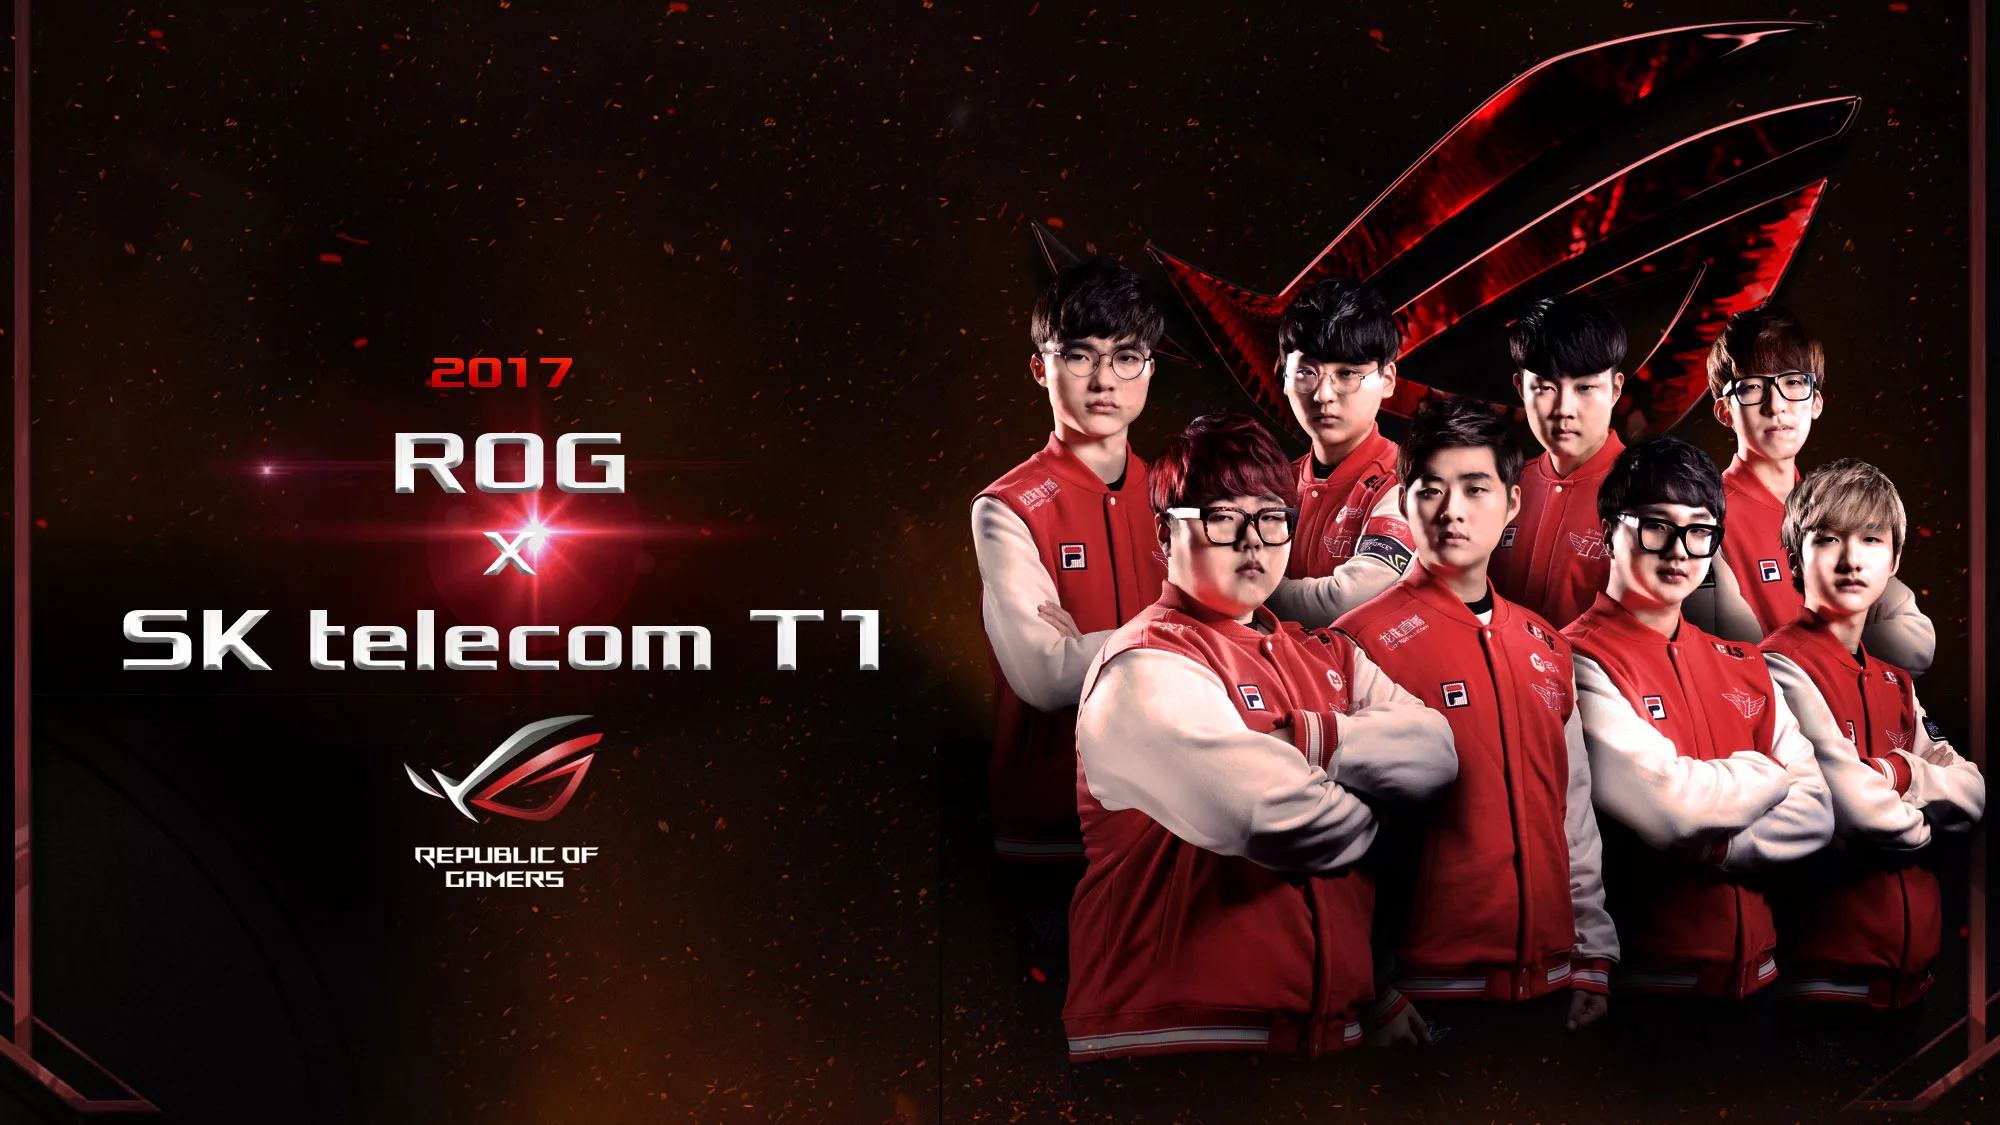 SK telecom T1 is powered by ROG | ROG - Republic of Gamers Global